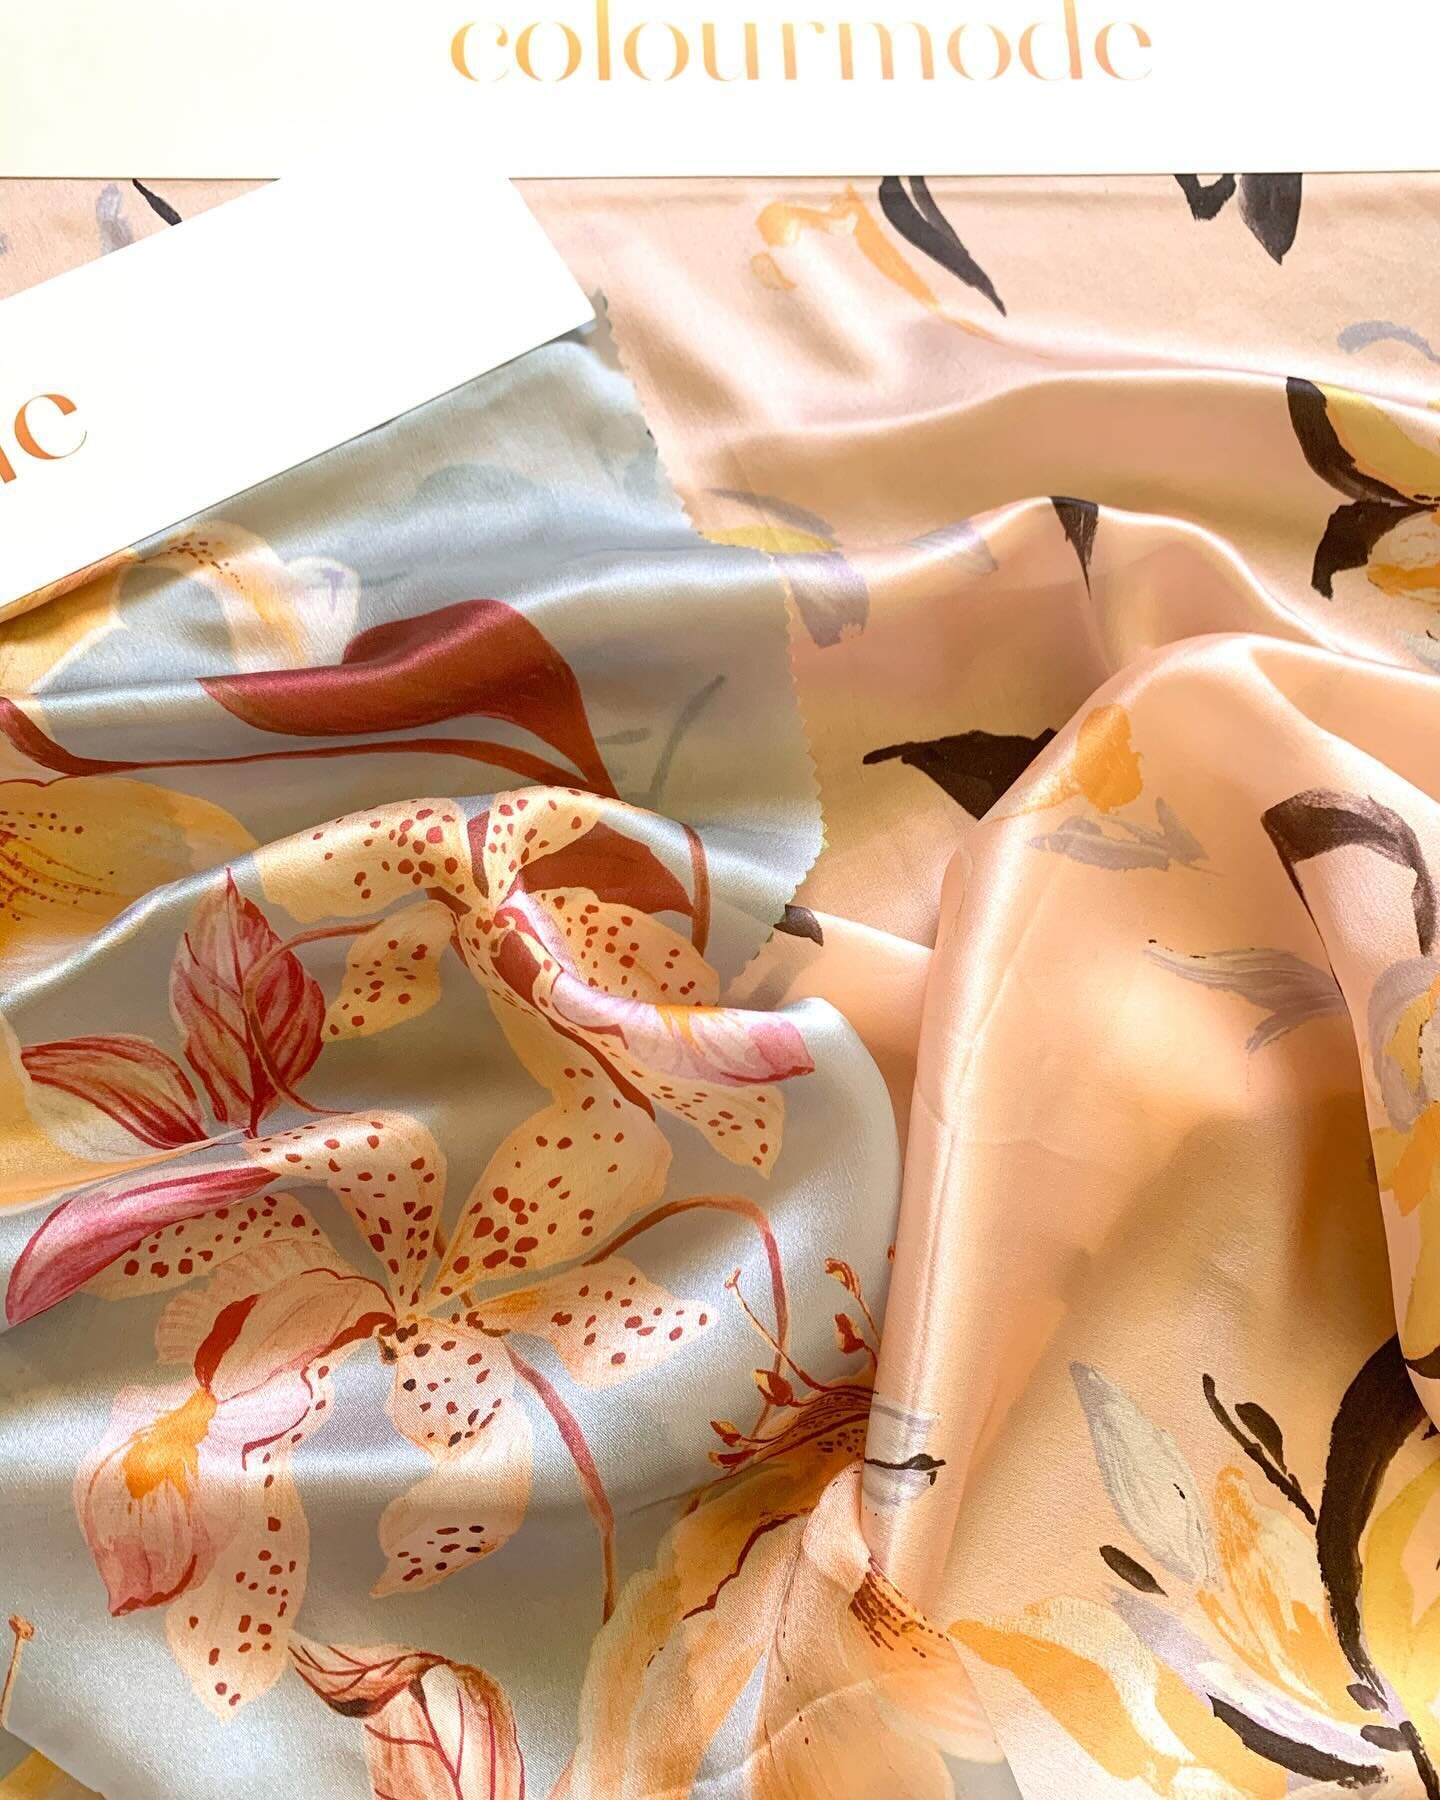 CHALKY PEACH 🍑 

New Spring available online or via our wonderful agents 

&bull;
&bull;
&bull;

#colourmode #pantone #peachfuzz #spring #printdesign #fashion #colourinspo #painted #floral